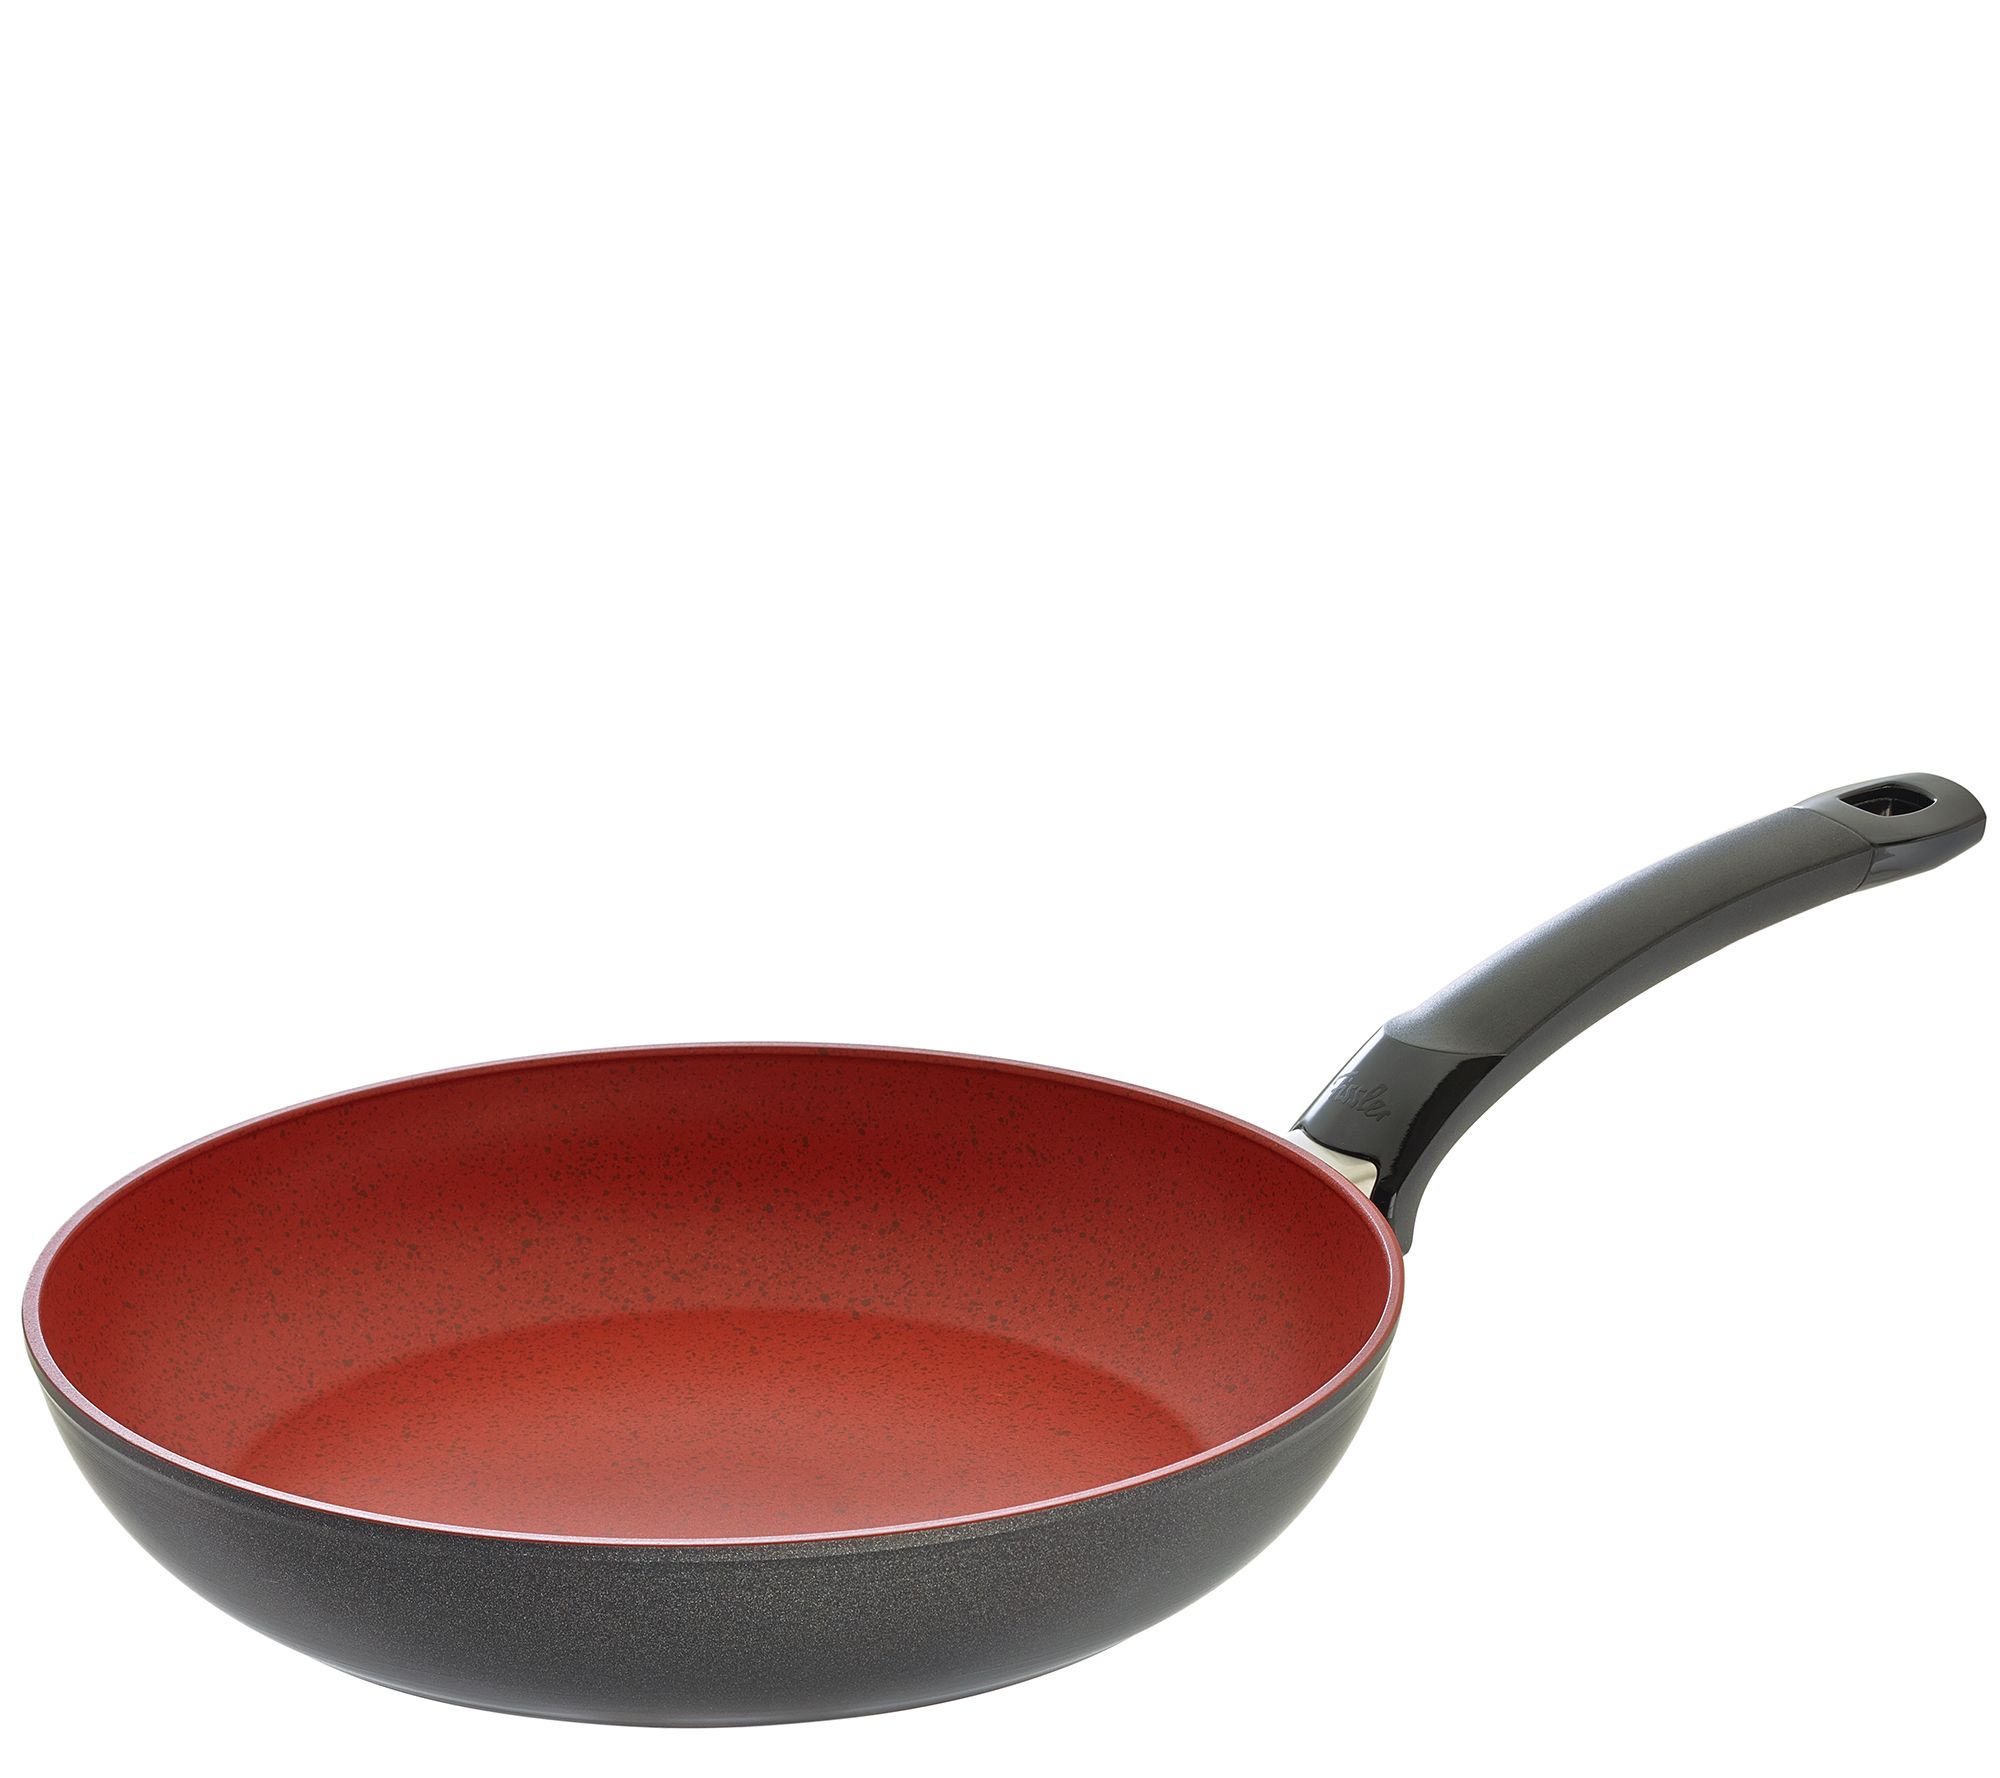 Oster Claybon 8 inch Aluminum Nonstick Frying Pan in Speckled Red